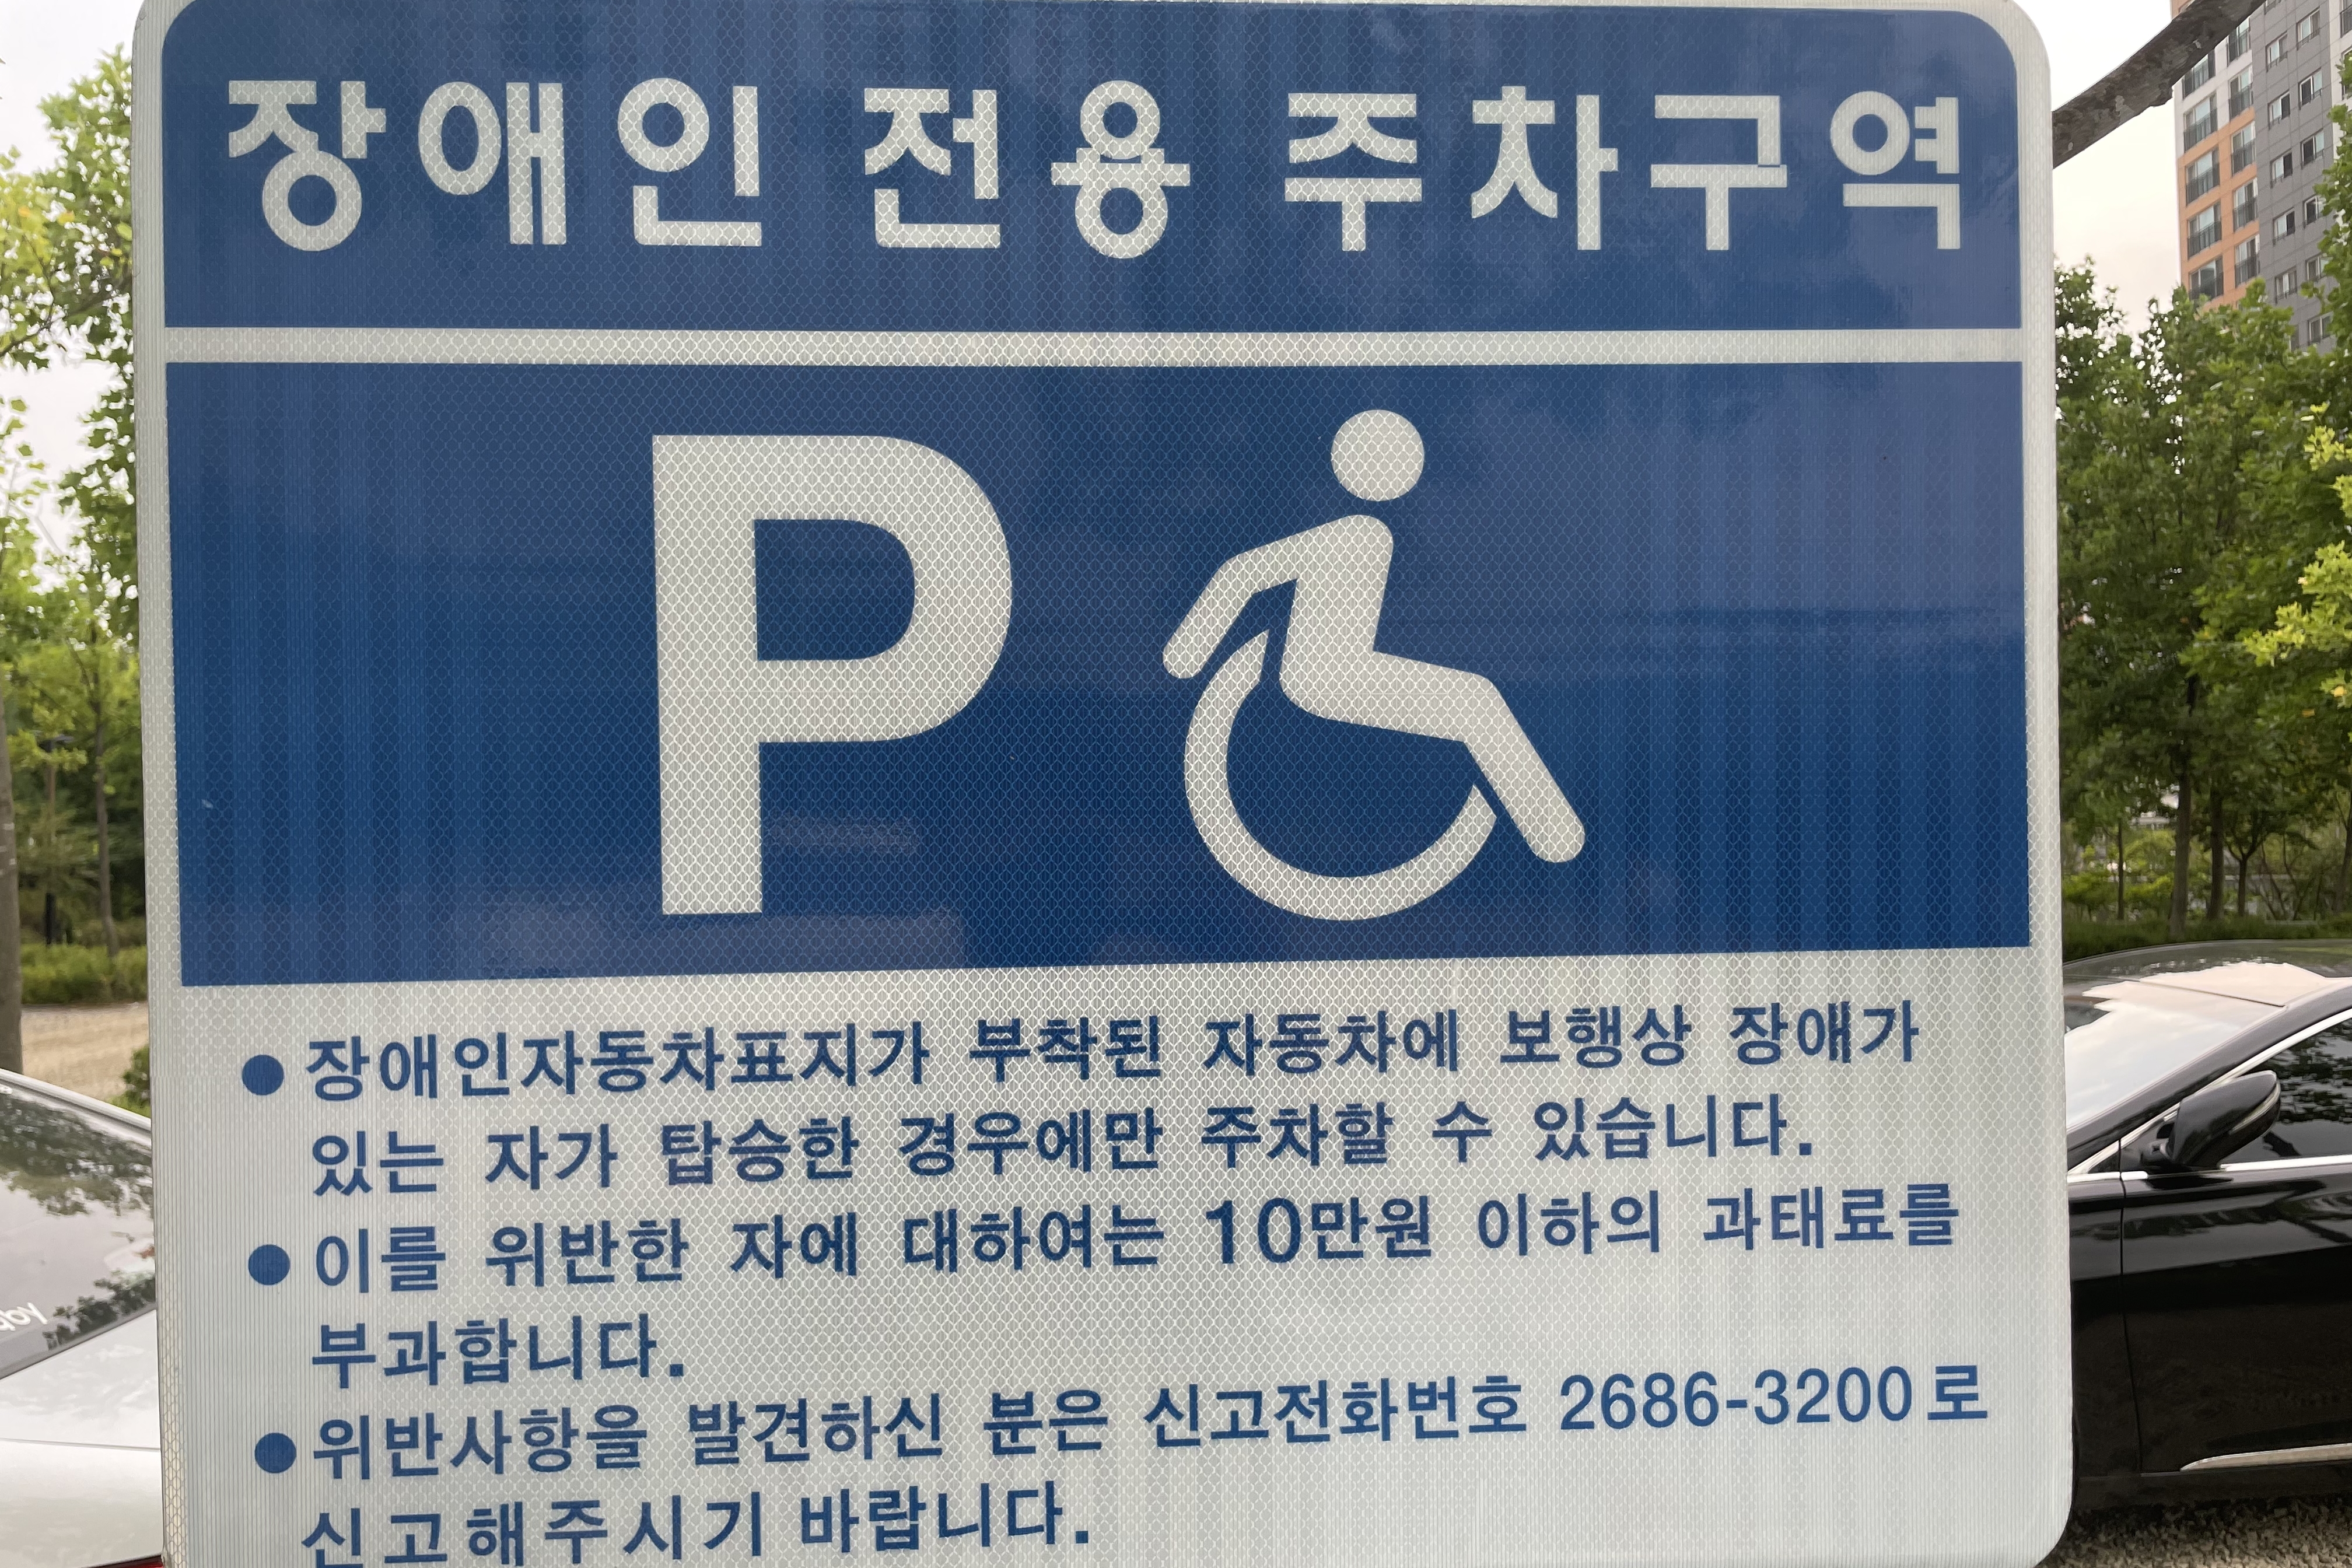 Parking lots0 : Signboard for the parking lots for wheelchair users in Pureun Arboretum
